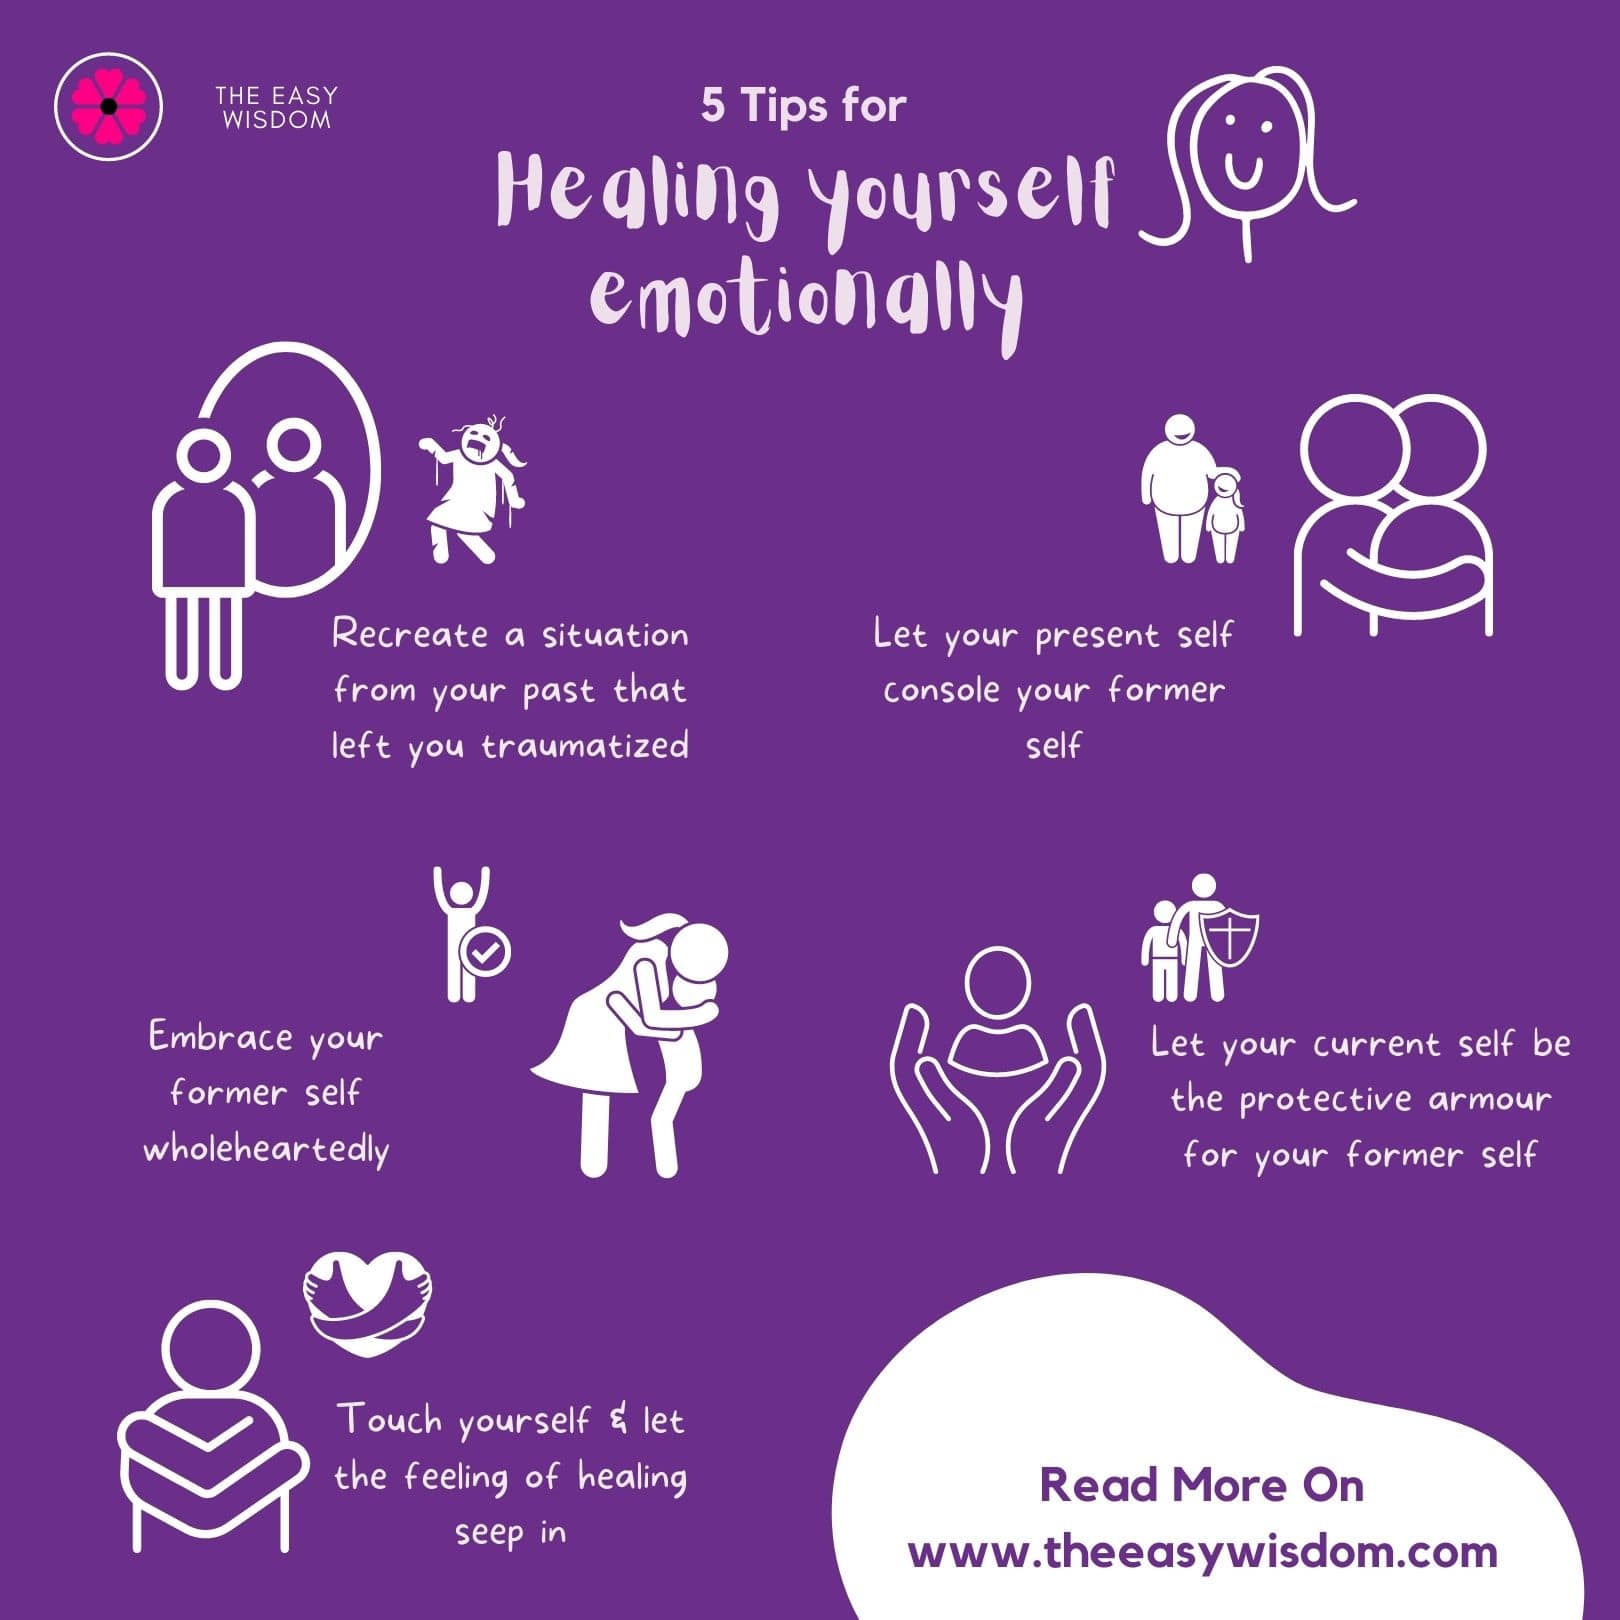 How To Heal Yourself Emotionally in 5 Steps?